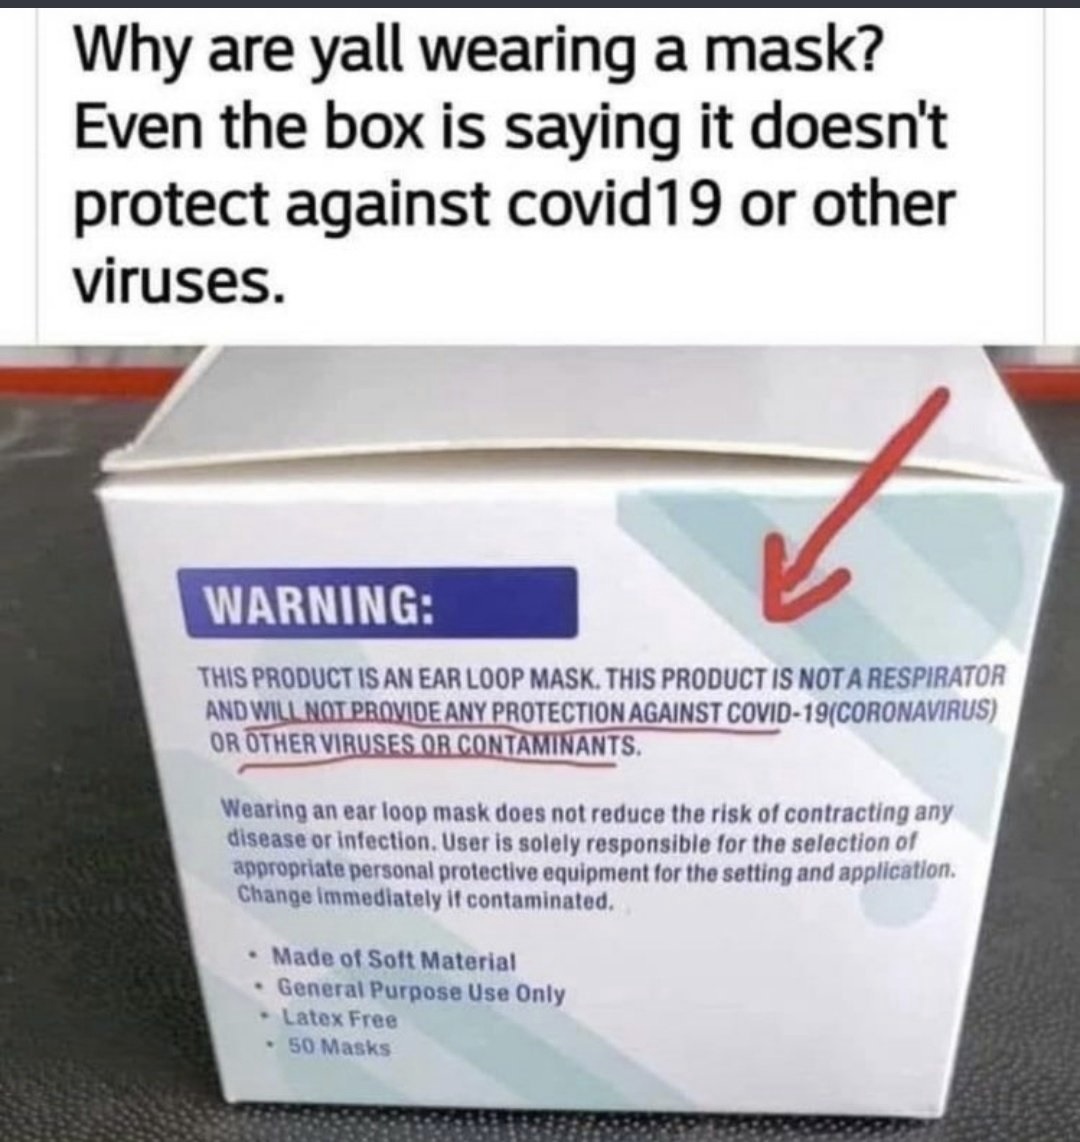 @ravena68 @forrestmaready Quarantine, when you restrict the movements of sick people...
Tyranny, when you restrict the movements of healthy people...
(they shouldn't confuse the two.)
(maybe read the box, too)